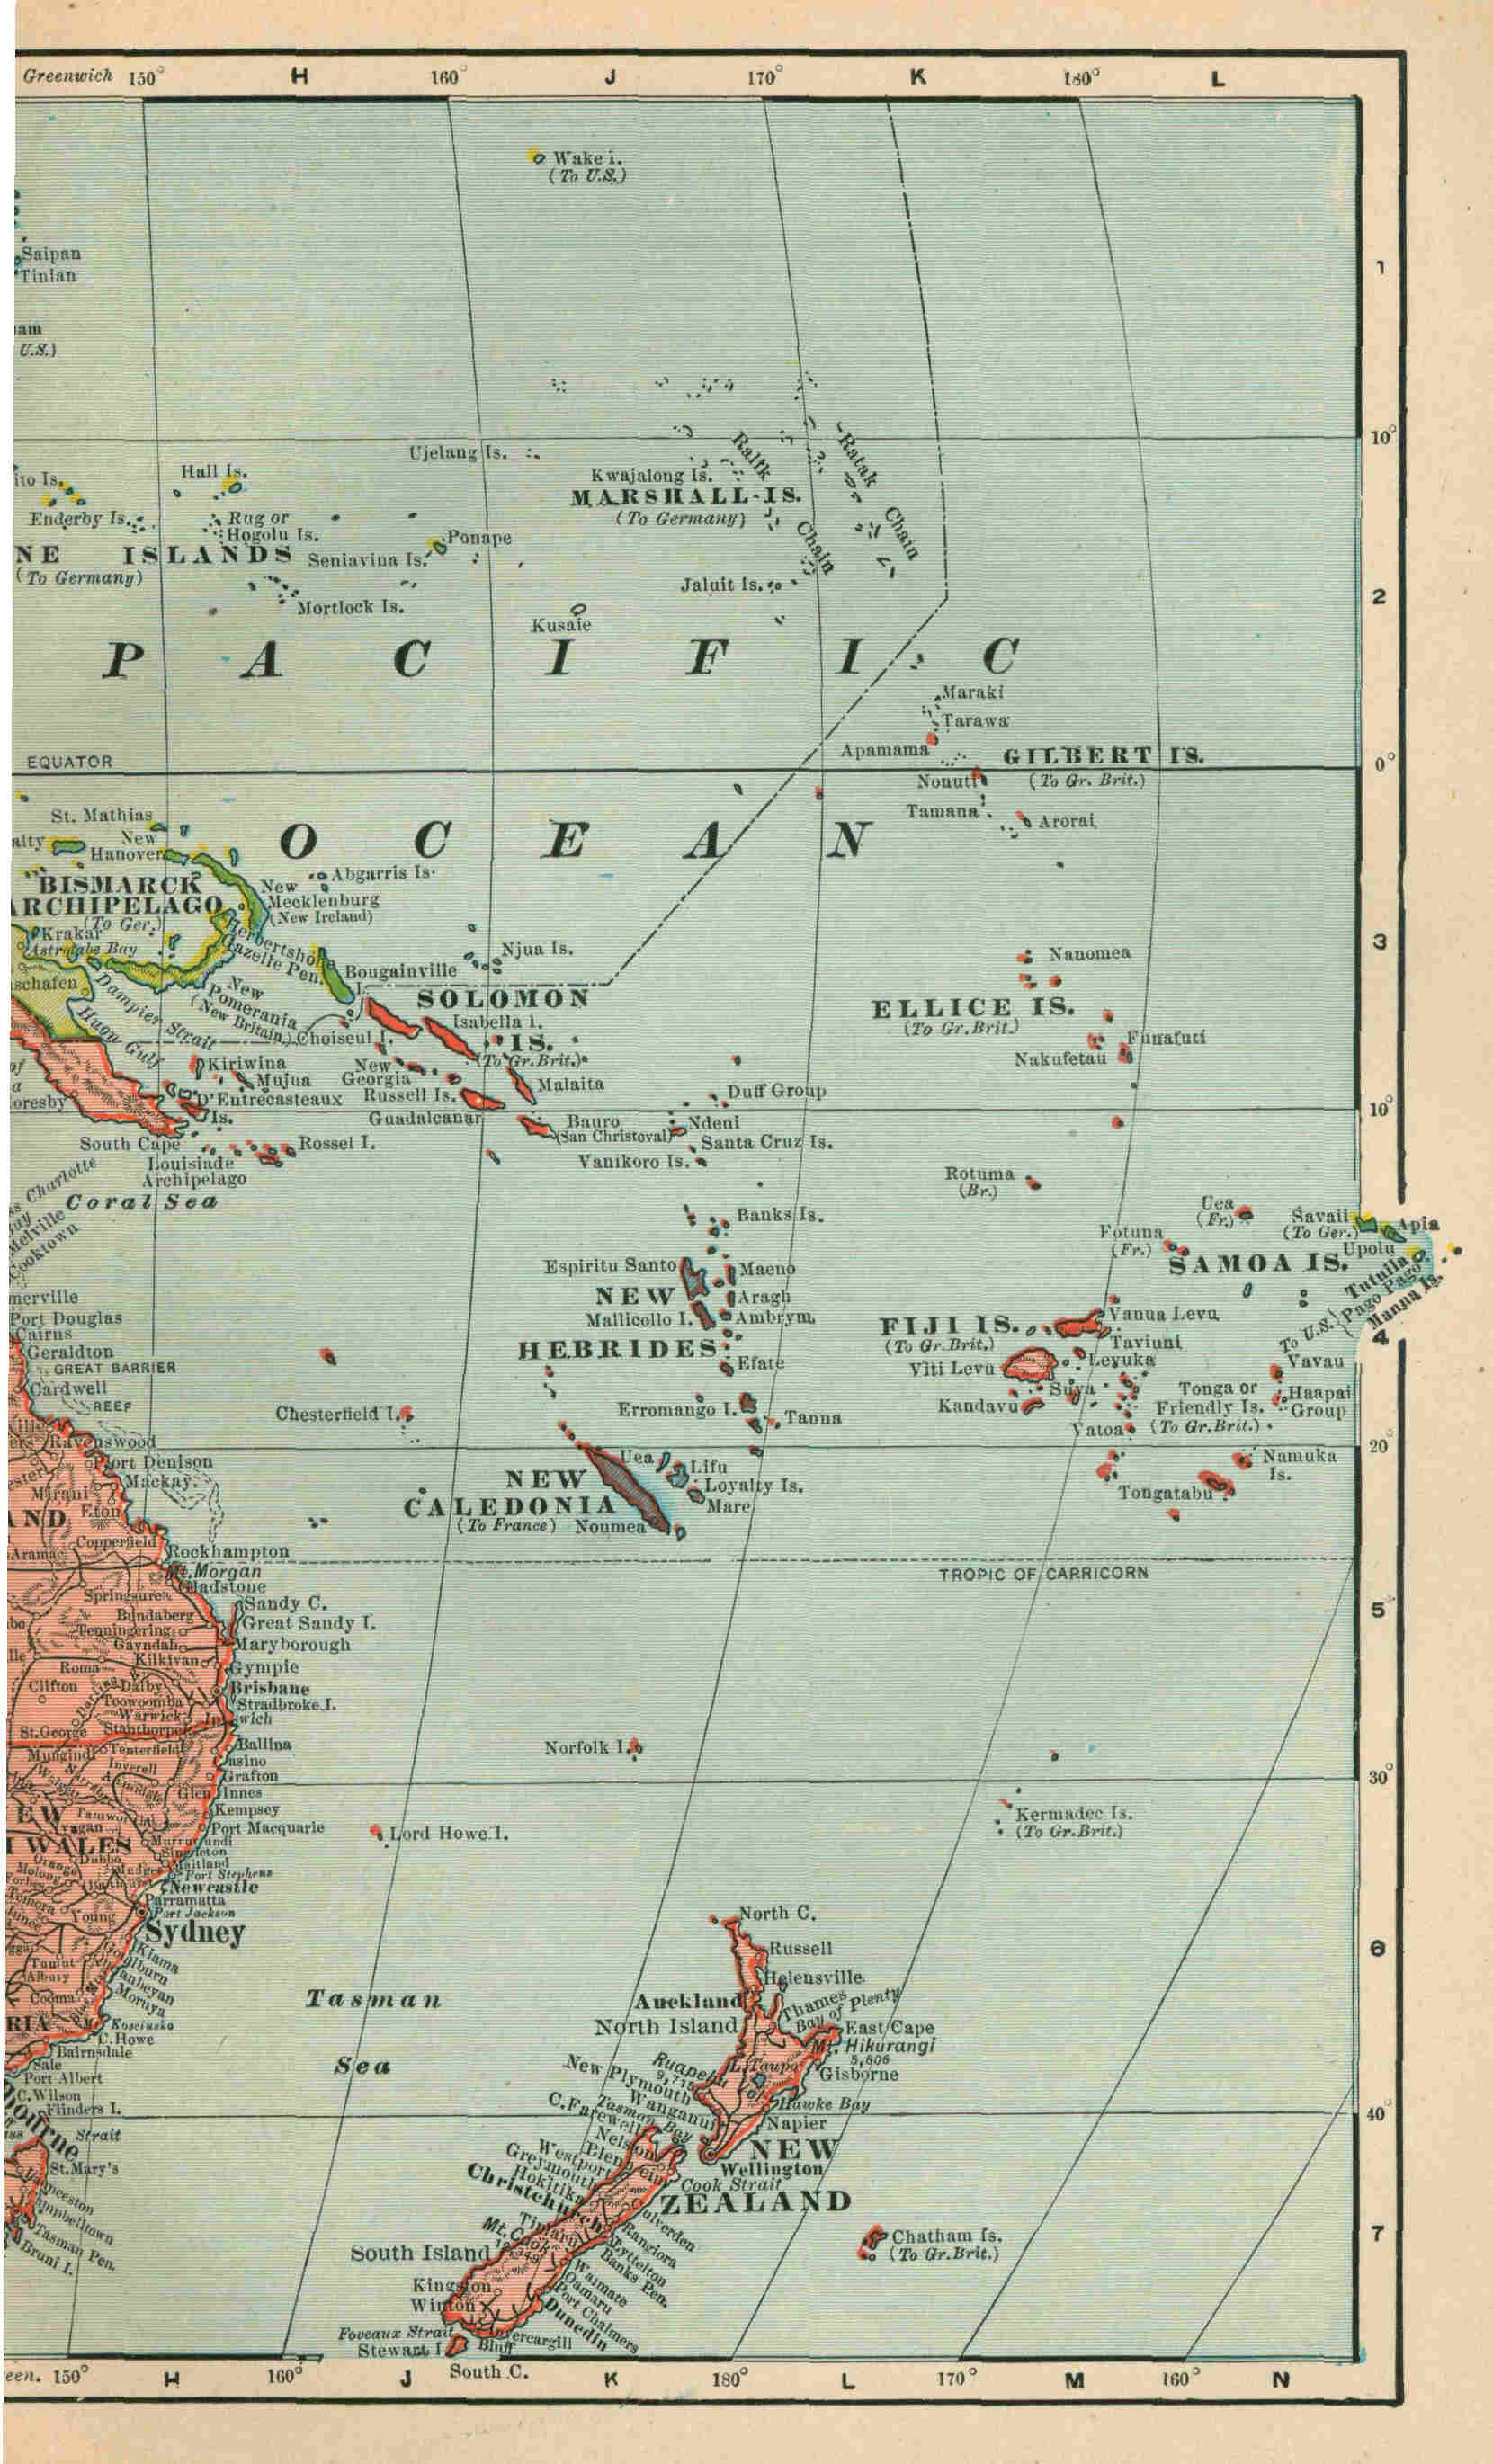 Map of Australia and Islands of the Pacific